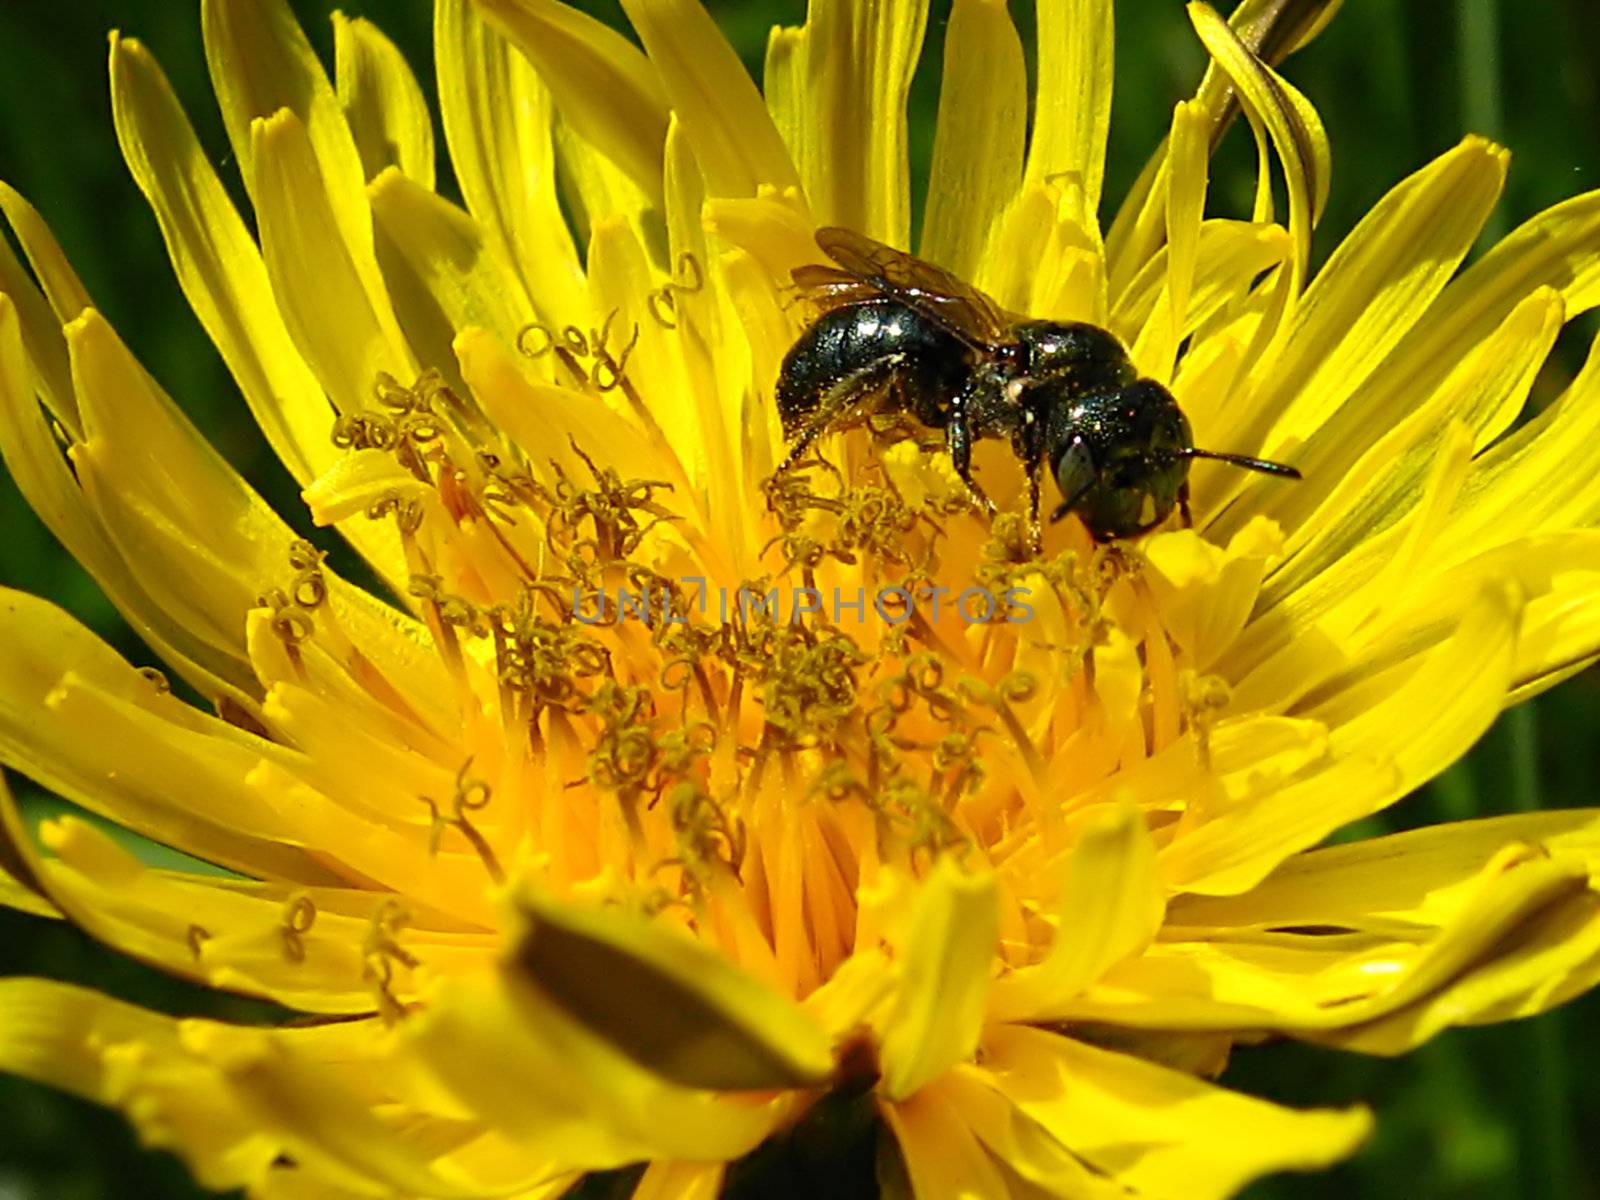 A photograph of a bee on a yellow flower.